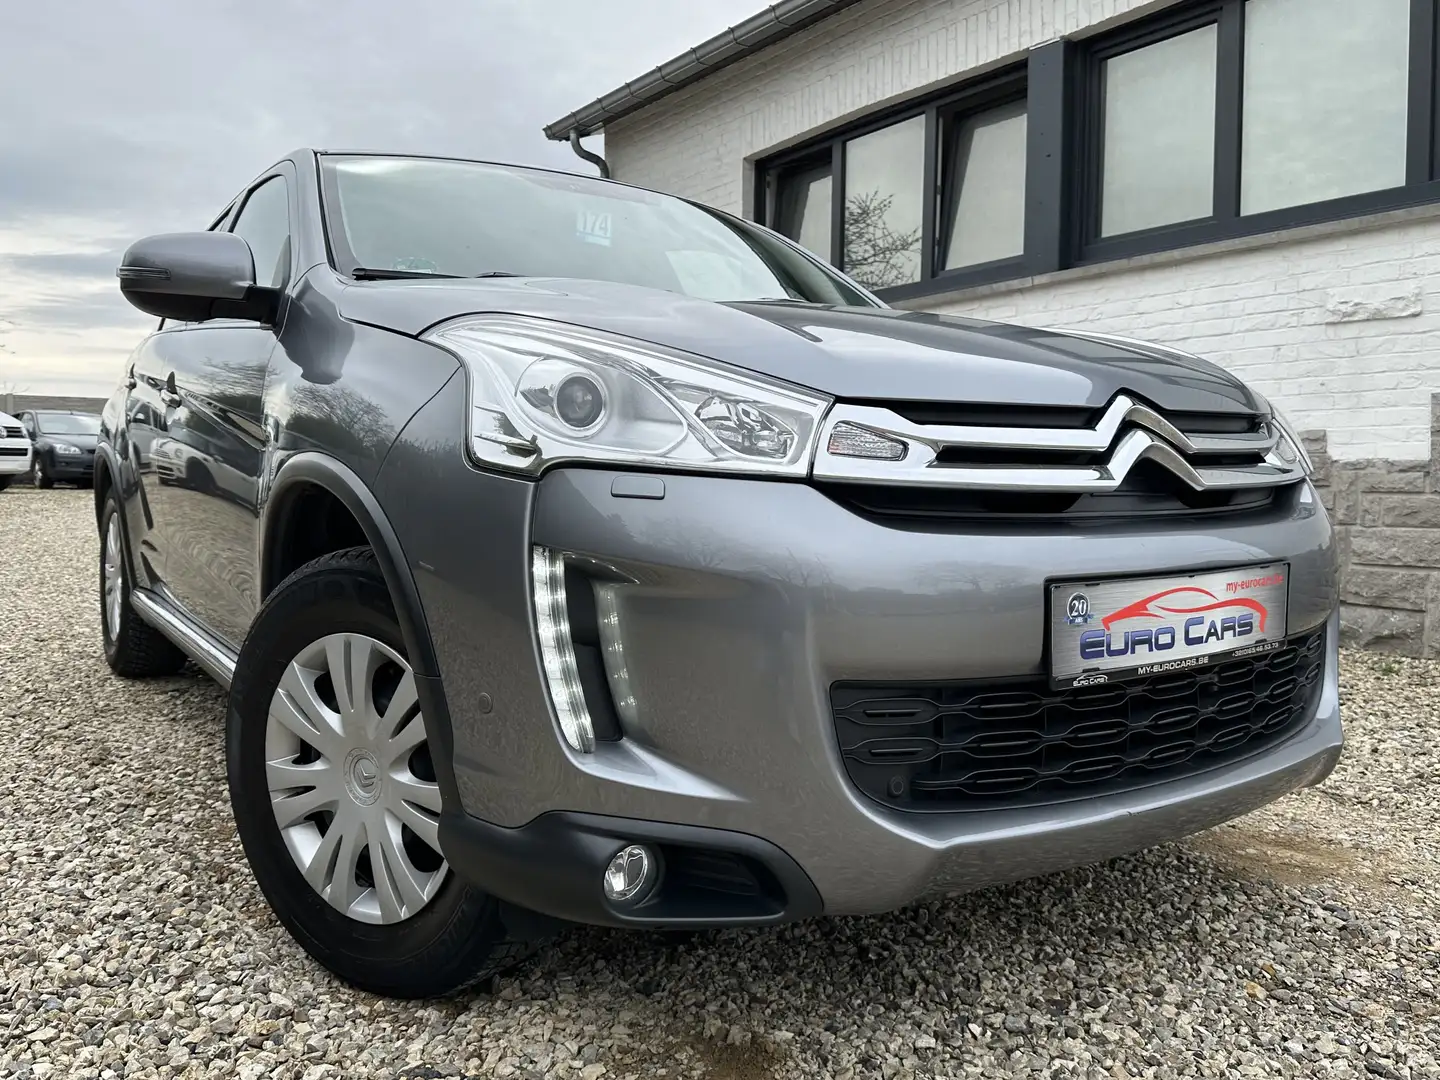 Citroen C4 Aircross 1.6i 2WD Exclusive CUIR/XENON/LED/CRUISE/PDC/ siva - 2